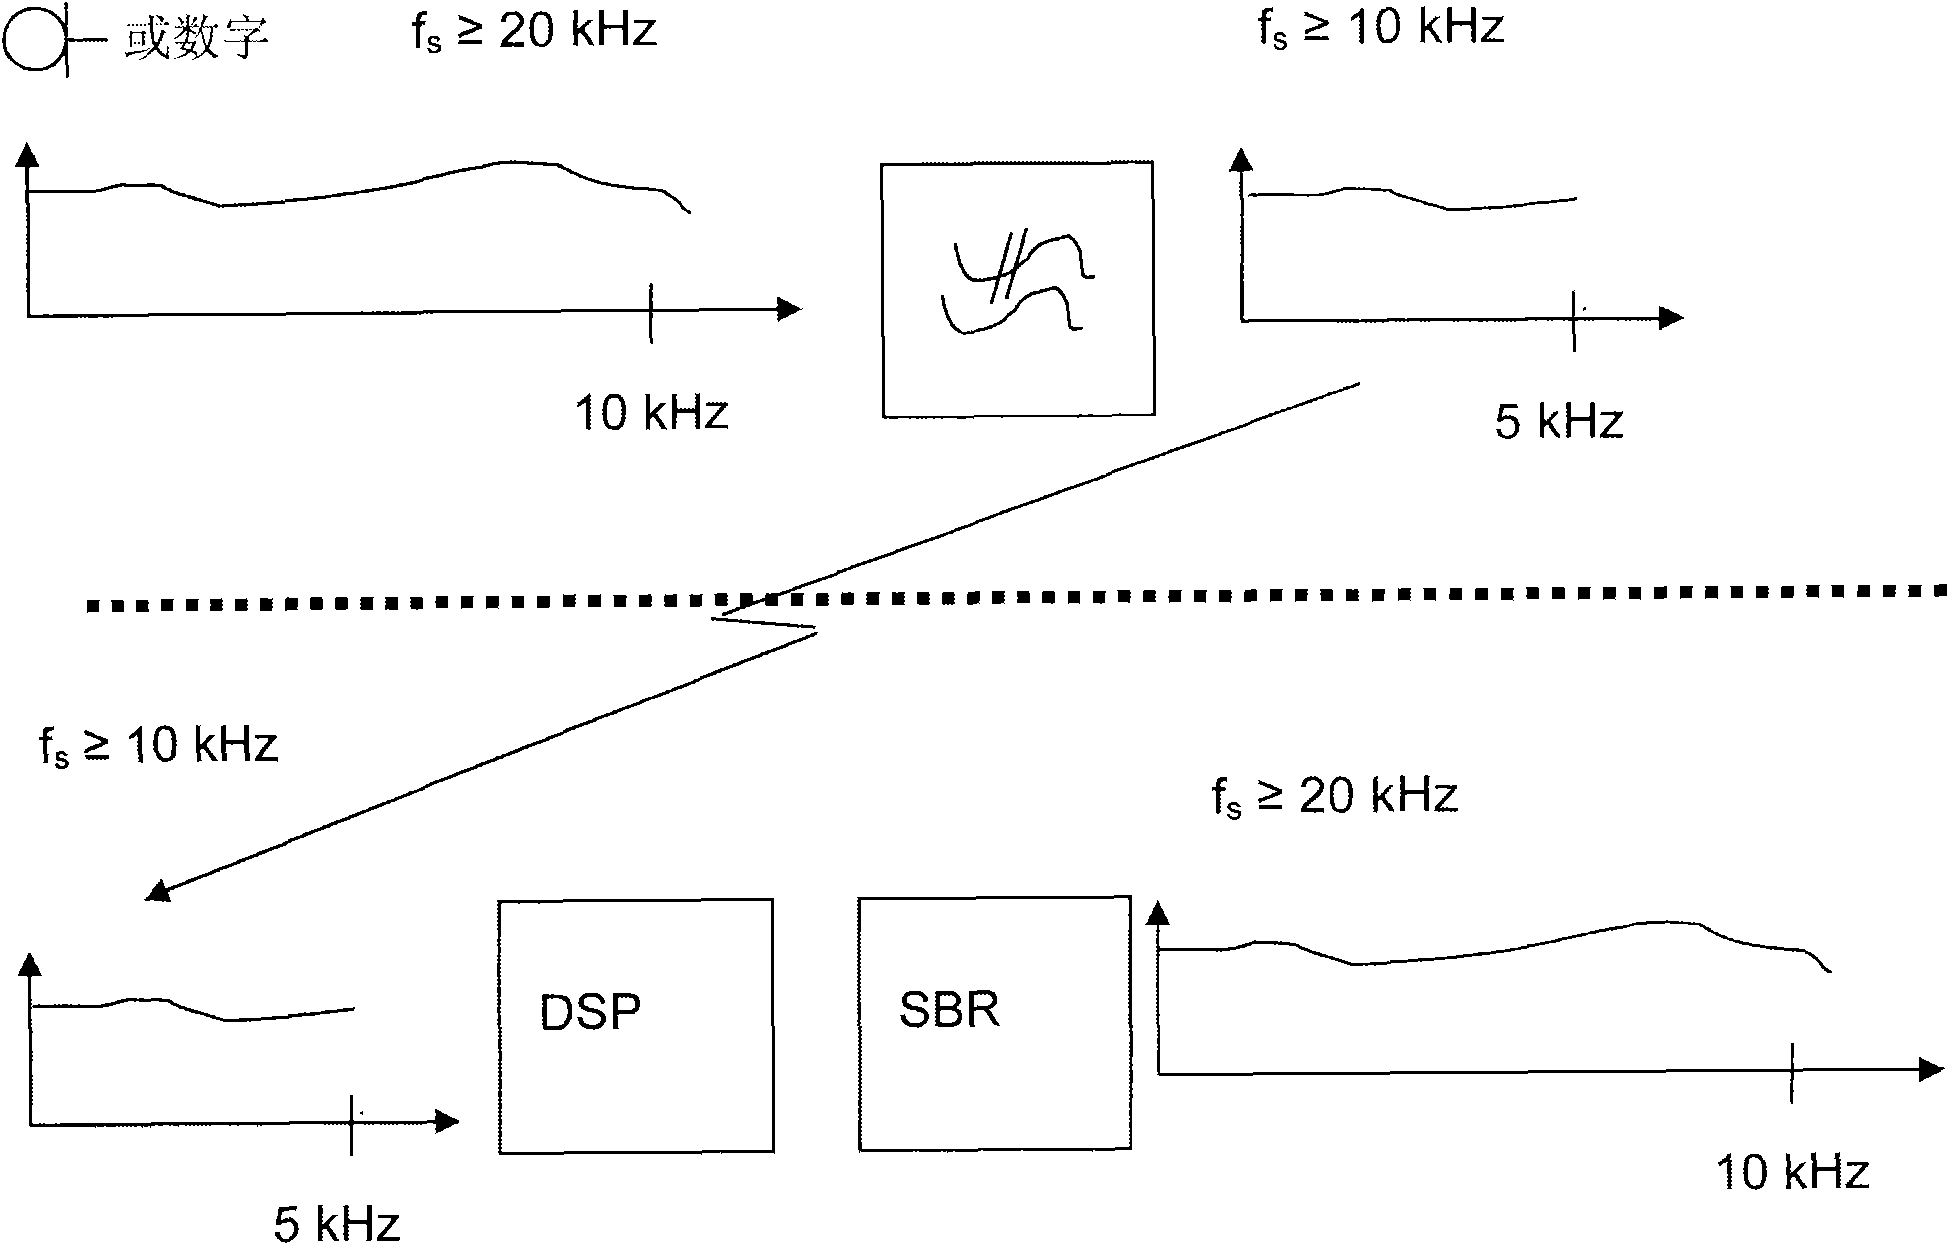 Audio processing in a portable listening device